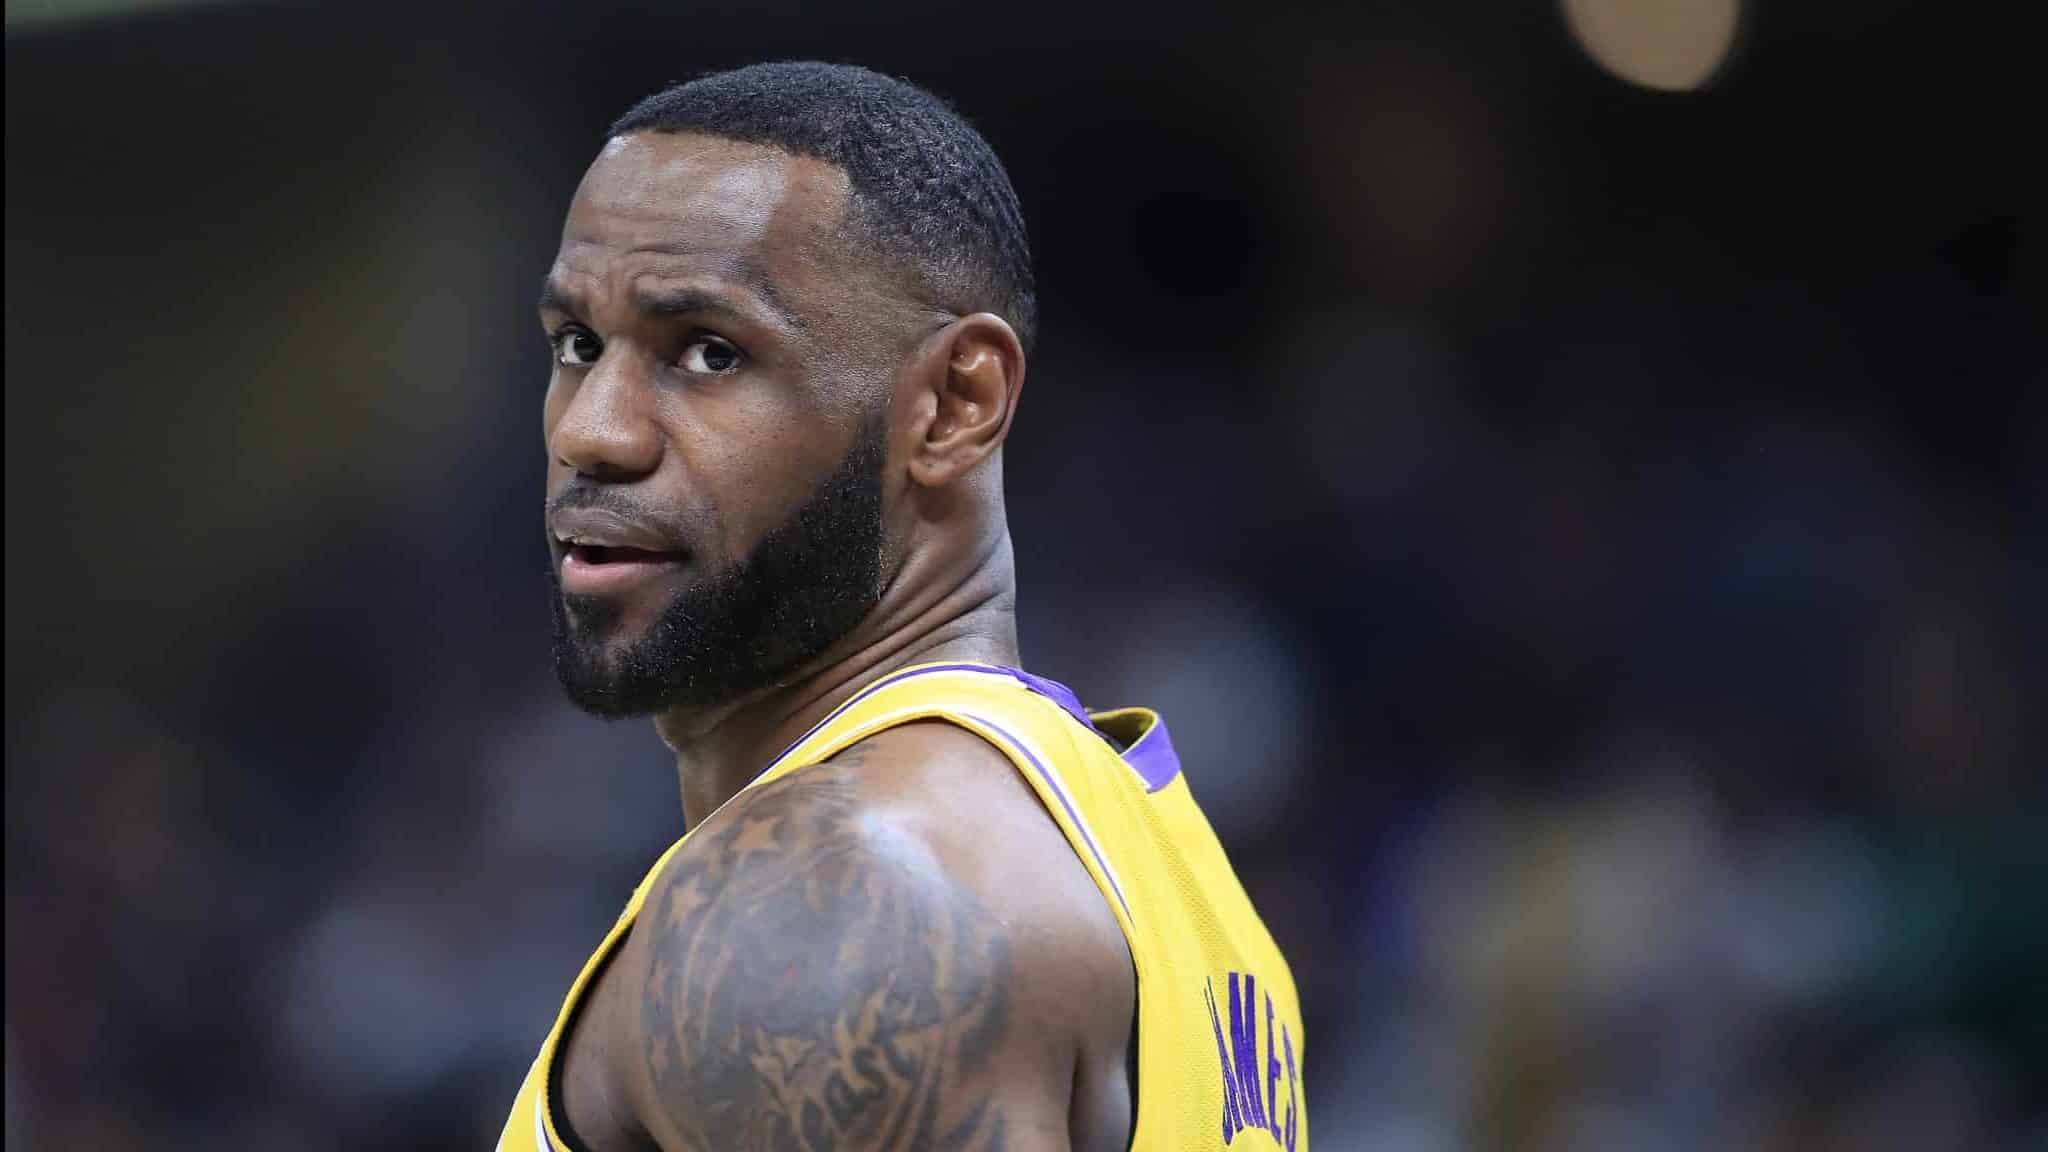 INDIANAPOLIS, INDIANA - DECEMBER 17: LeBron James #23 of the Los Angeles Lakers during the game against the Indiana Pacers at Bankers Life Fieldhouse on December 17, 2019 in Indianapolis, Indiana. NOTE TO USER: User expressly acknowledges and agrees that, by downloading and or using this photograph, User is consenting to the terms and conditions of the Getty Images License Agreement.